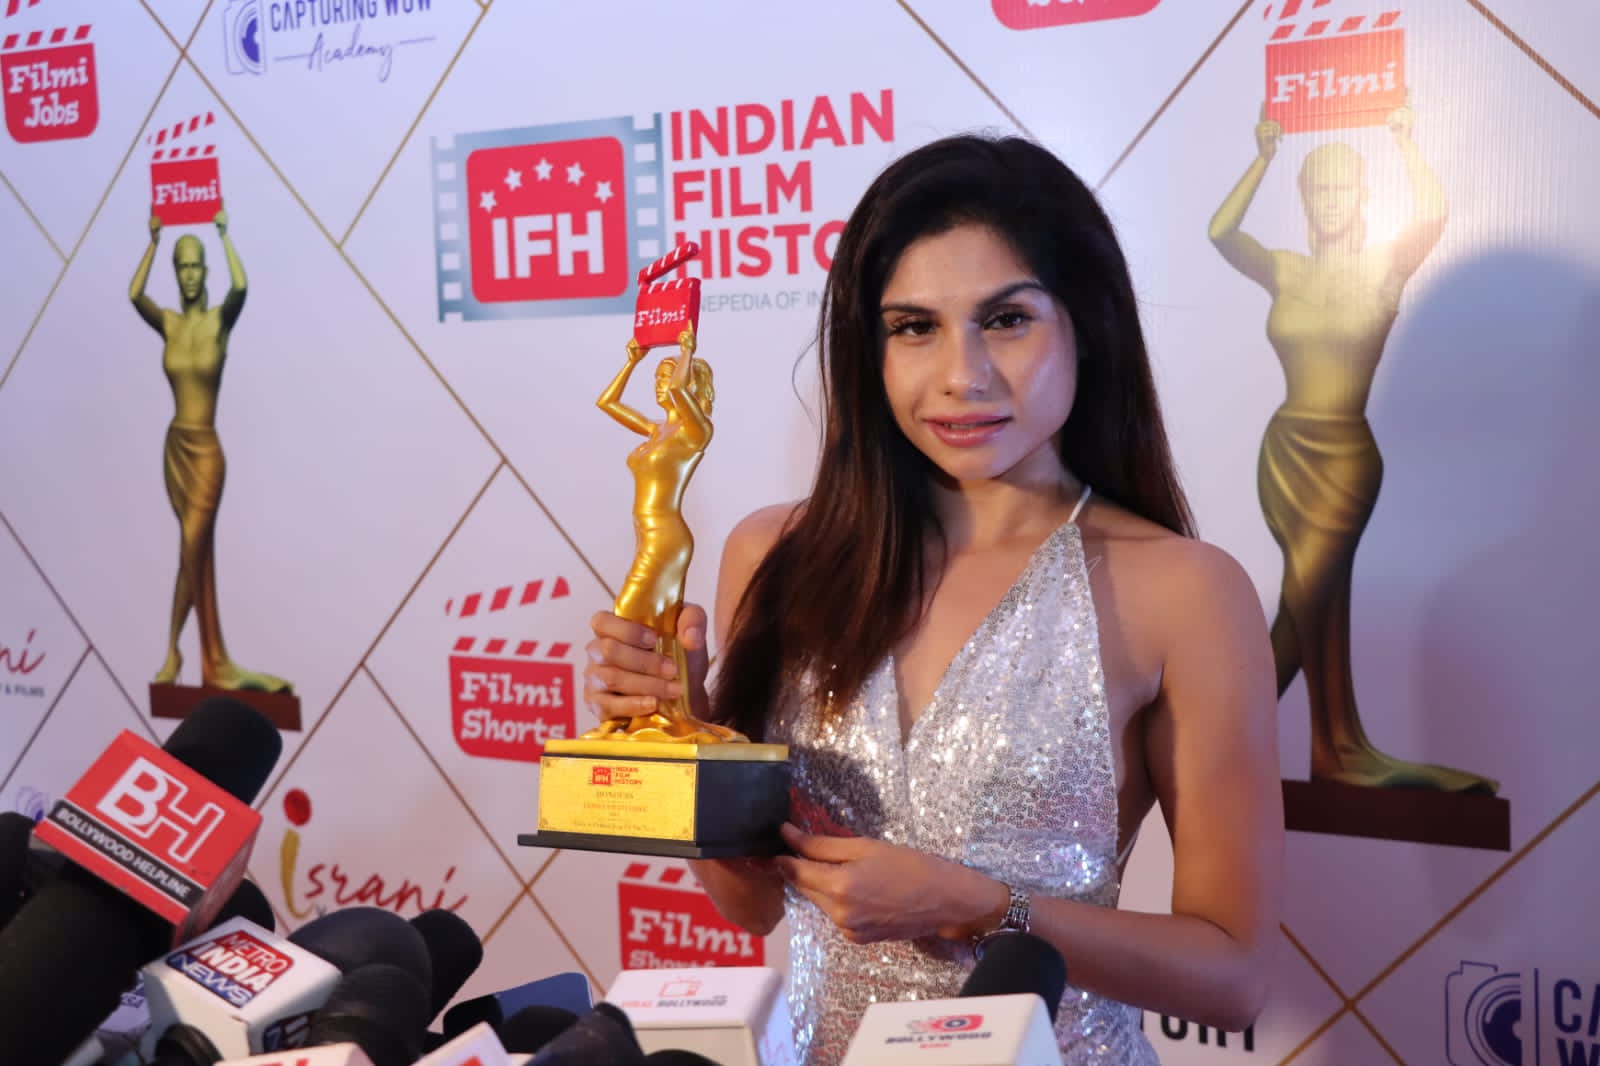 From Nandish Singh Sandhu to Sherlyn Chopra & many others Filmi Shortfest Awards Night’ 2023 was all about glamour and star power